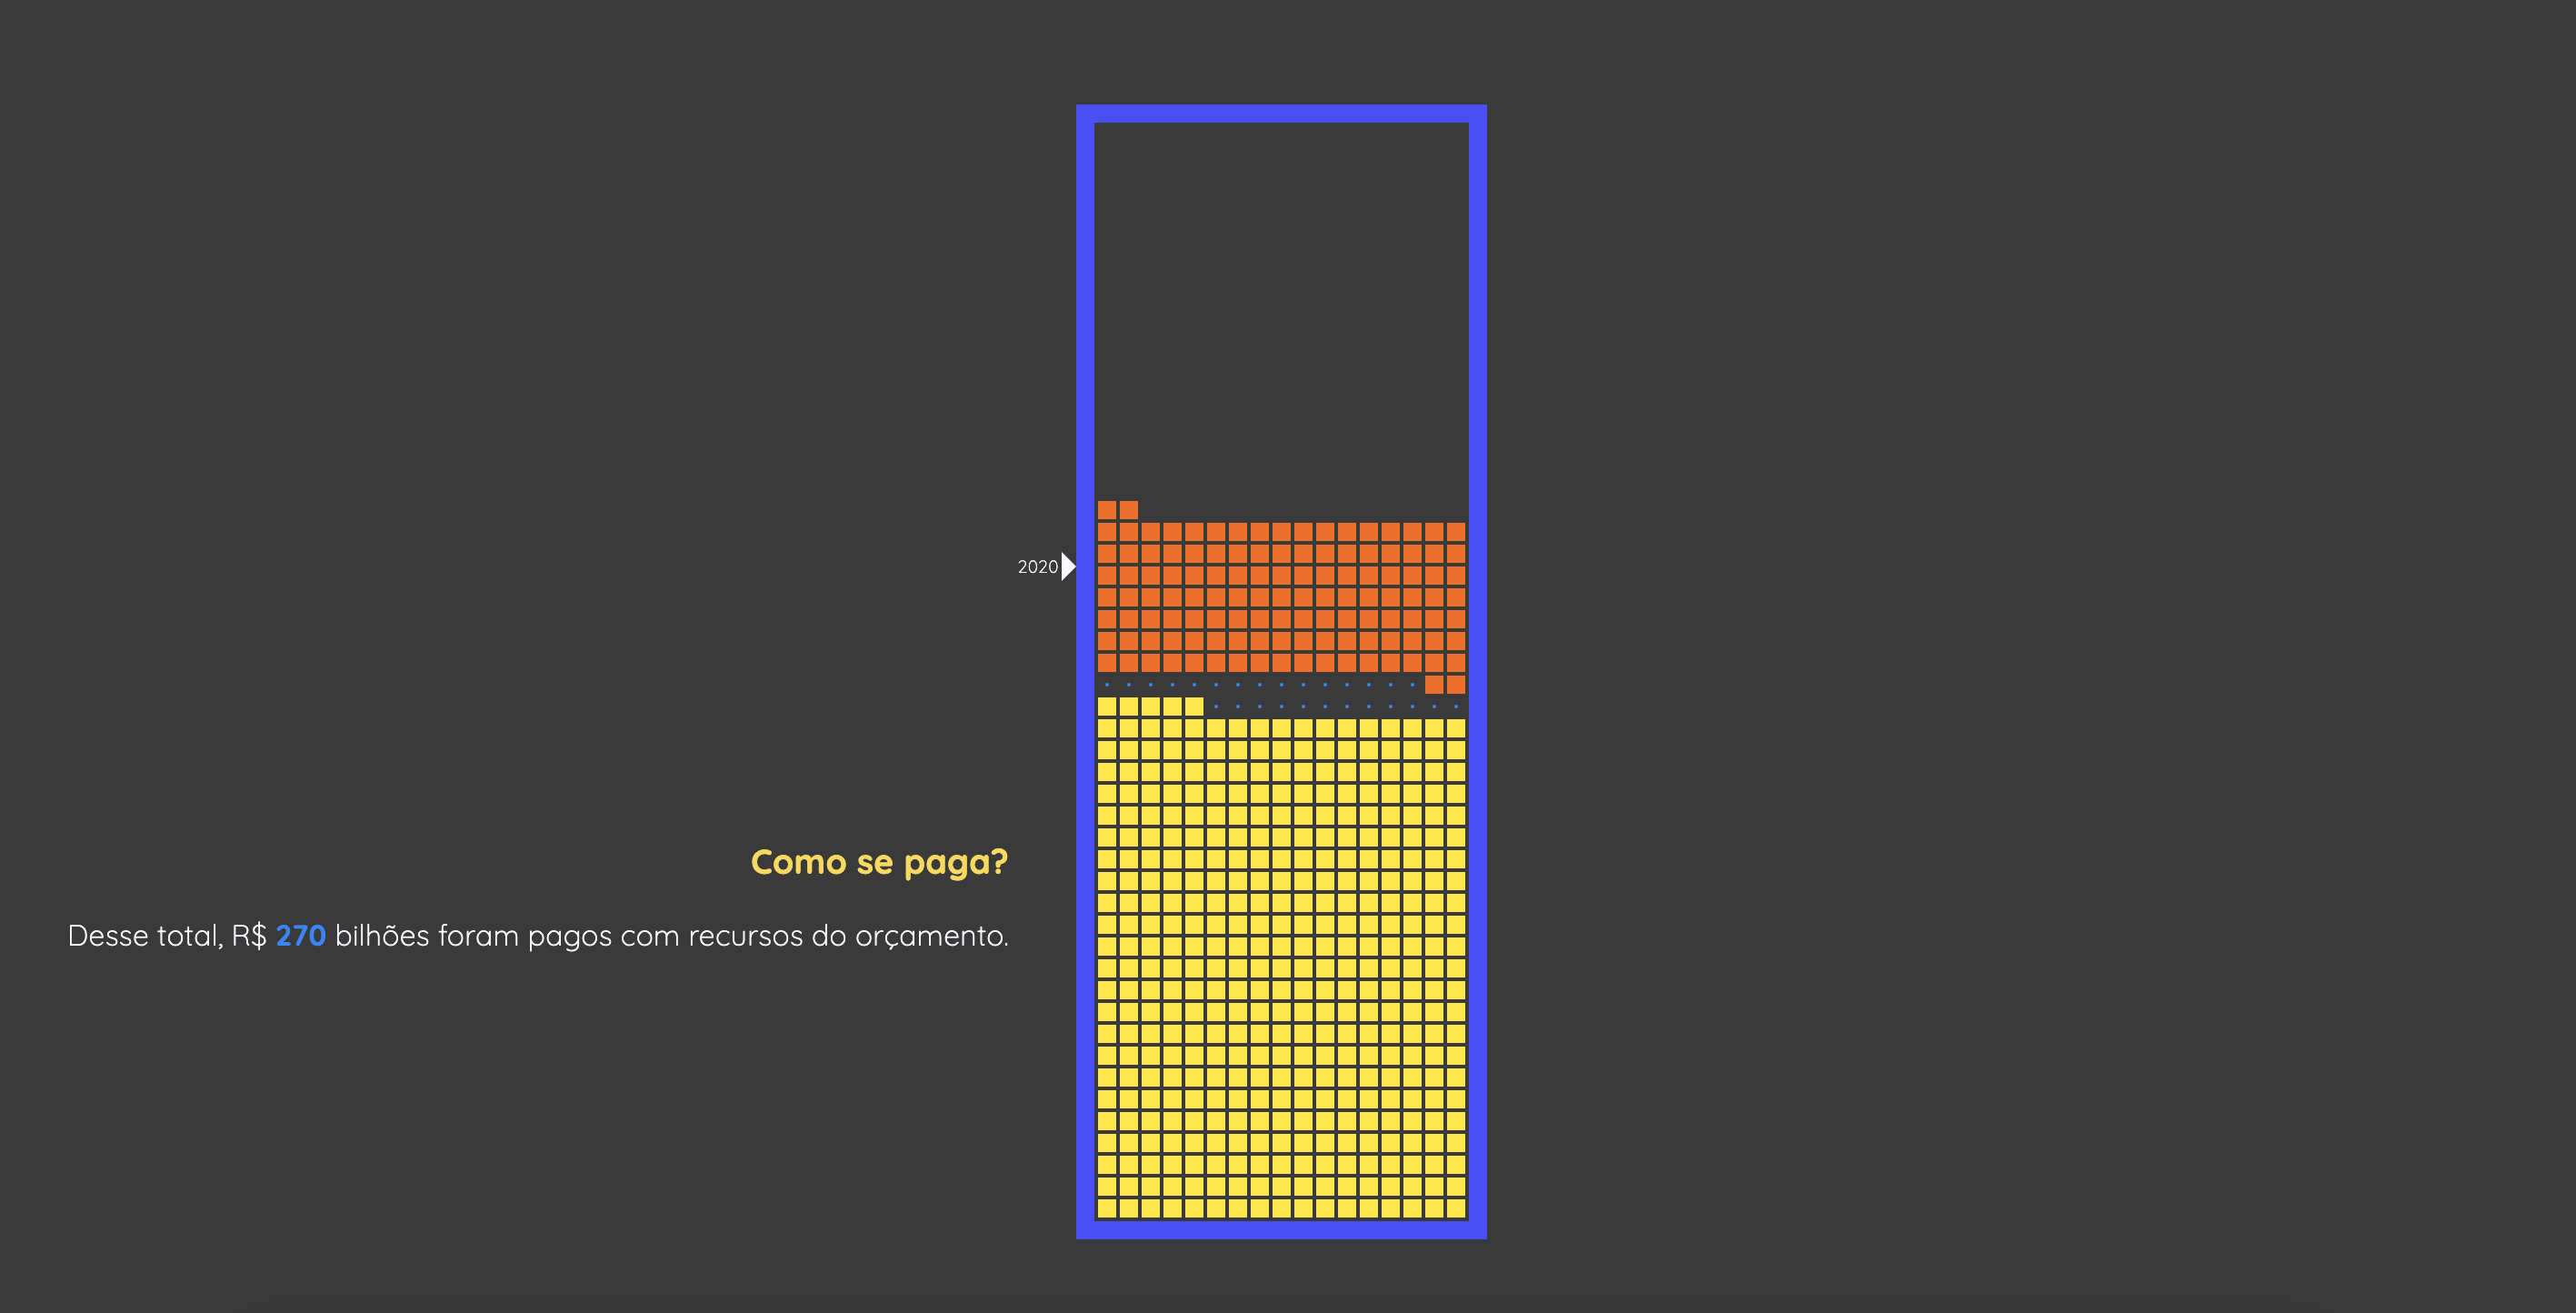 A snapshot of one of the story's screen, showing the national public debt of Brazil as a bunch of Tetris blocks.